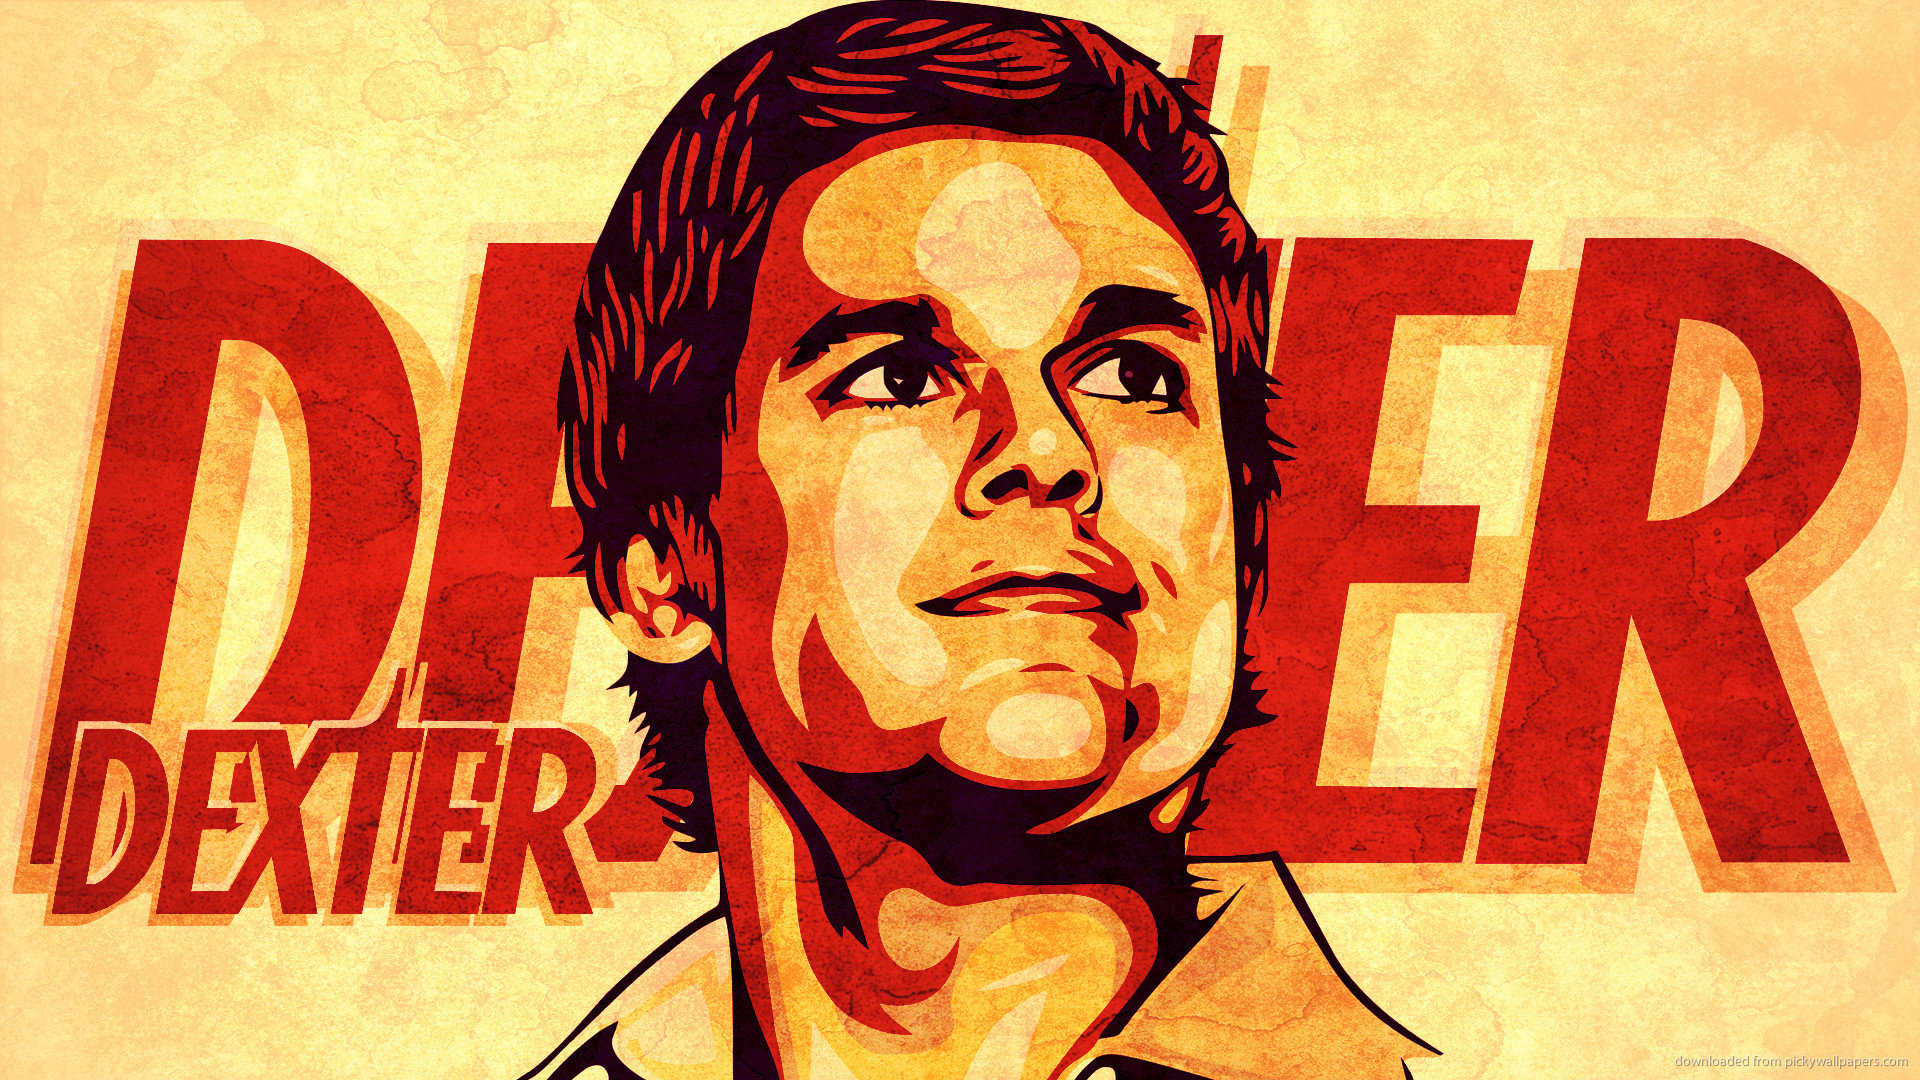 Download 1080p Dexter computer wallpaper ID:275839 for free